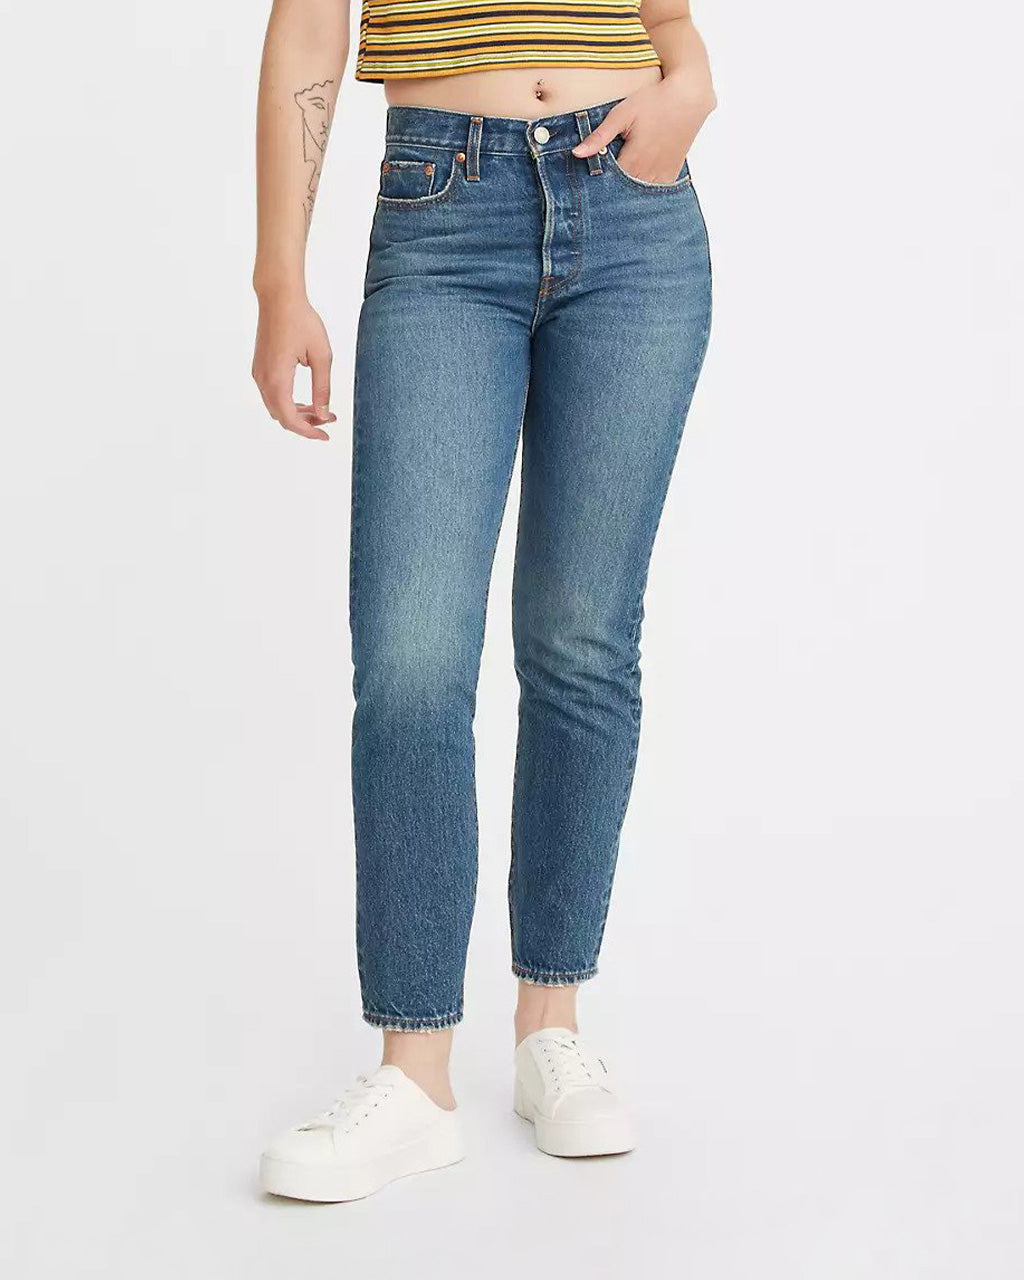 Wedgie Icon Fit - Oxnard Edge by Levi's - jeans 